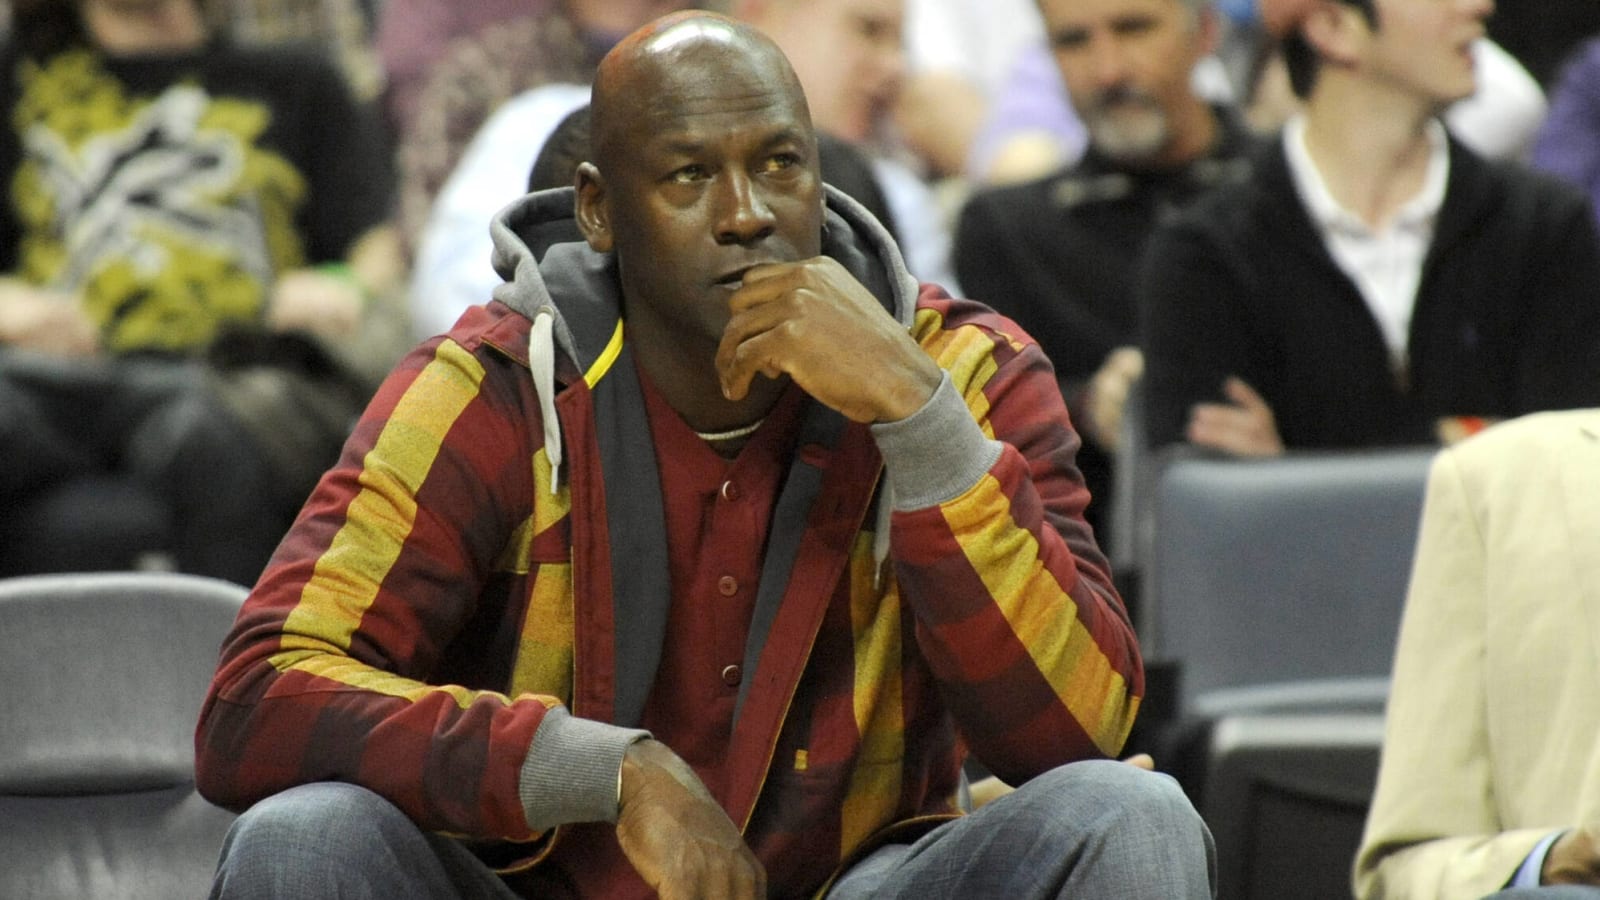 Michael Jordan Made NBA History 3 Times With Wizards Despite Missing Playoffs Both Years: ‘Jordan’s Stint On The Wizards Is Often Derided For Being Aesthetically Unpleasant And Jordanically Unimpressive, But Hold On!’